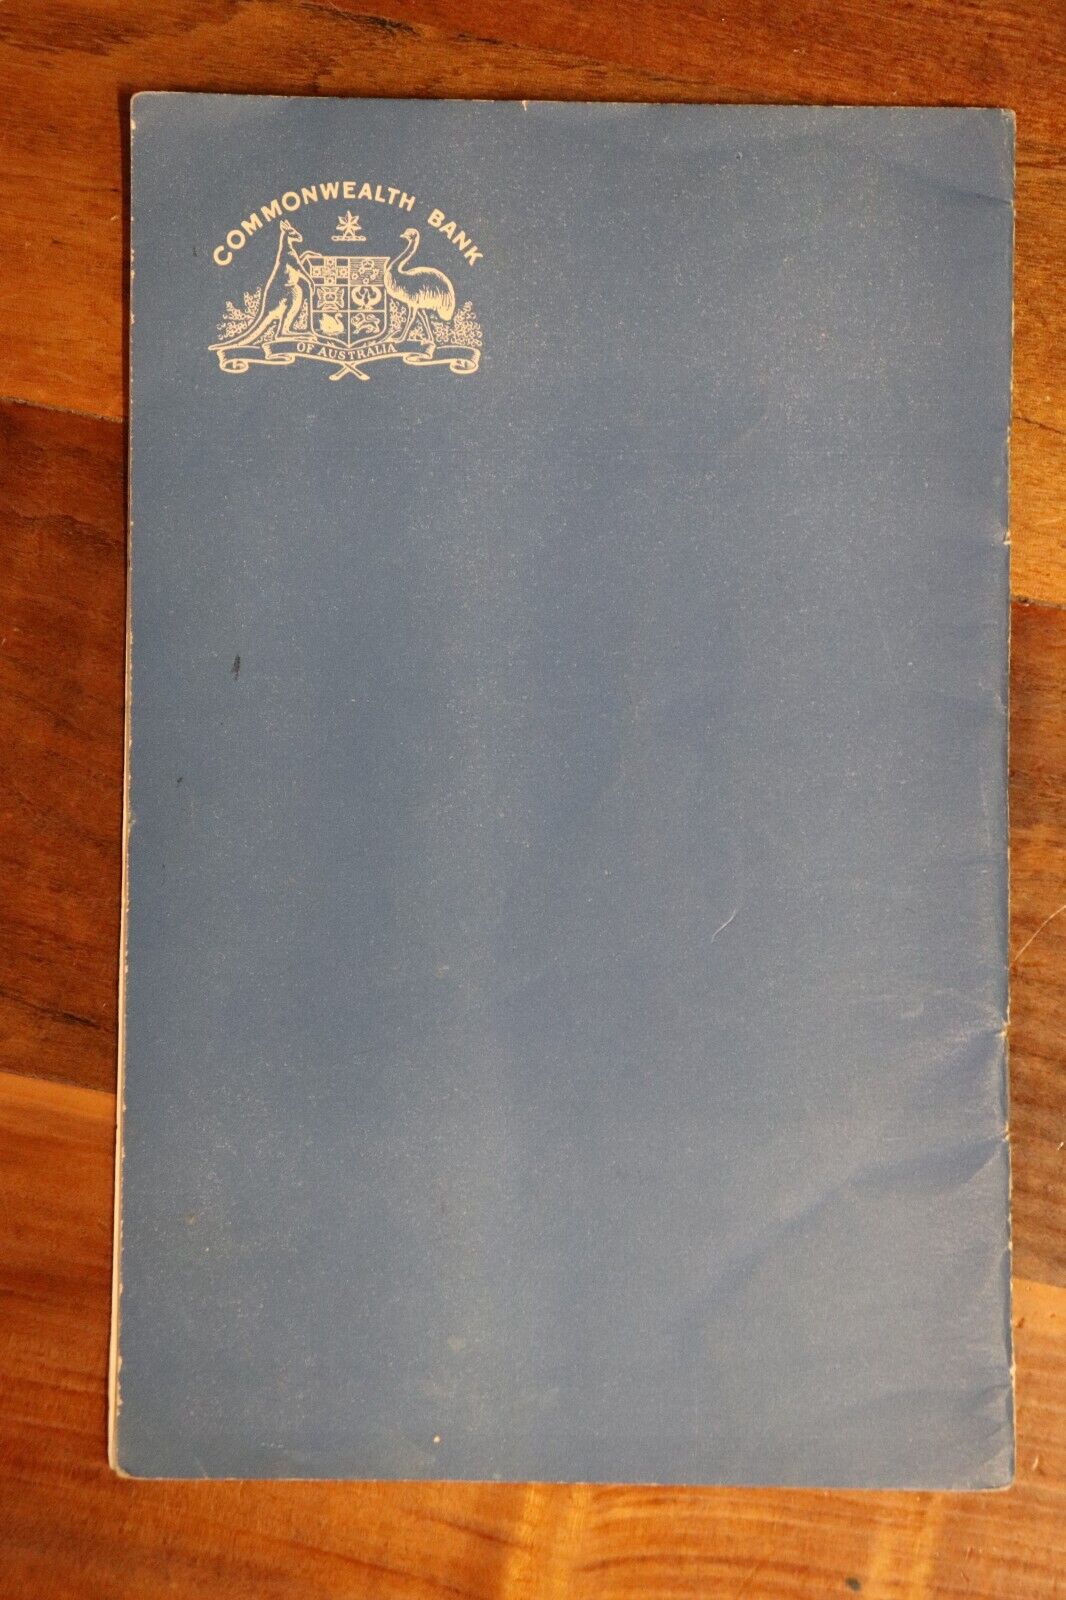 Commonwealth Bank Of Australia Housing Loans Guide Book - 1947